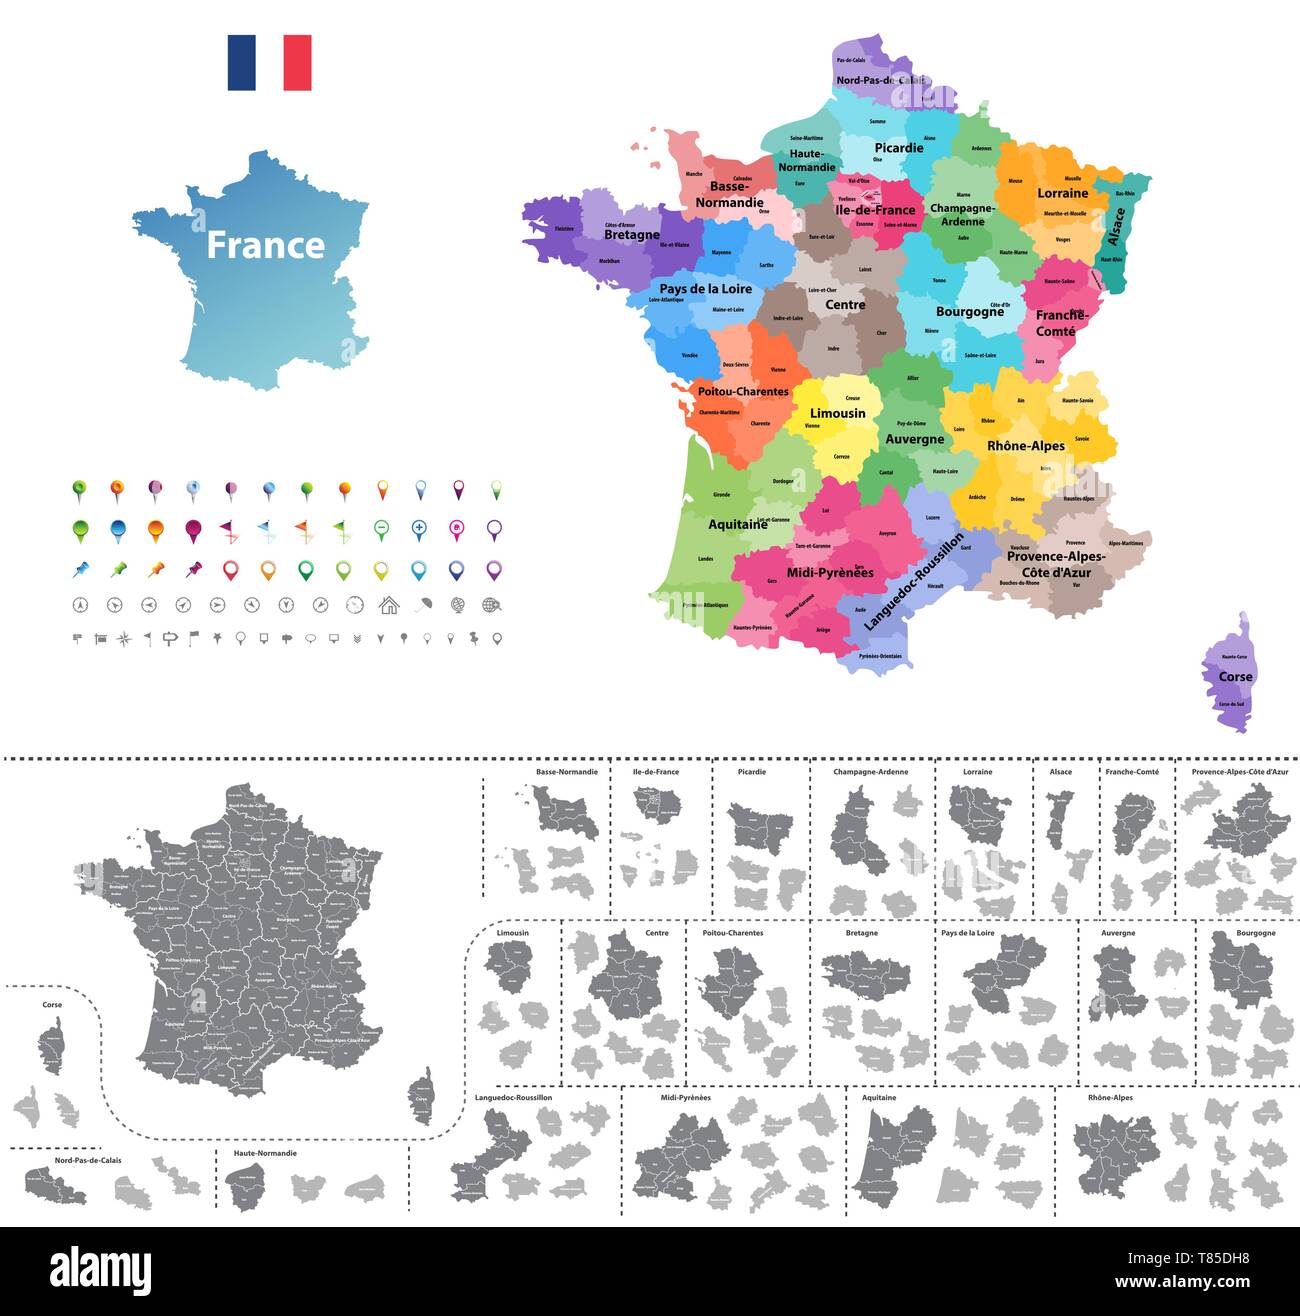 administrative regions and departments of France vector map Stock Vector